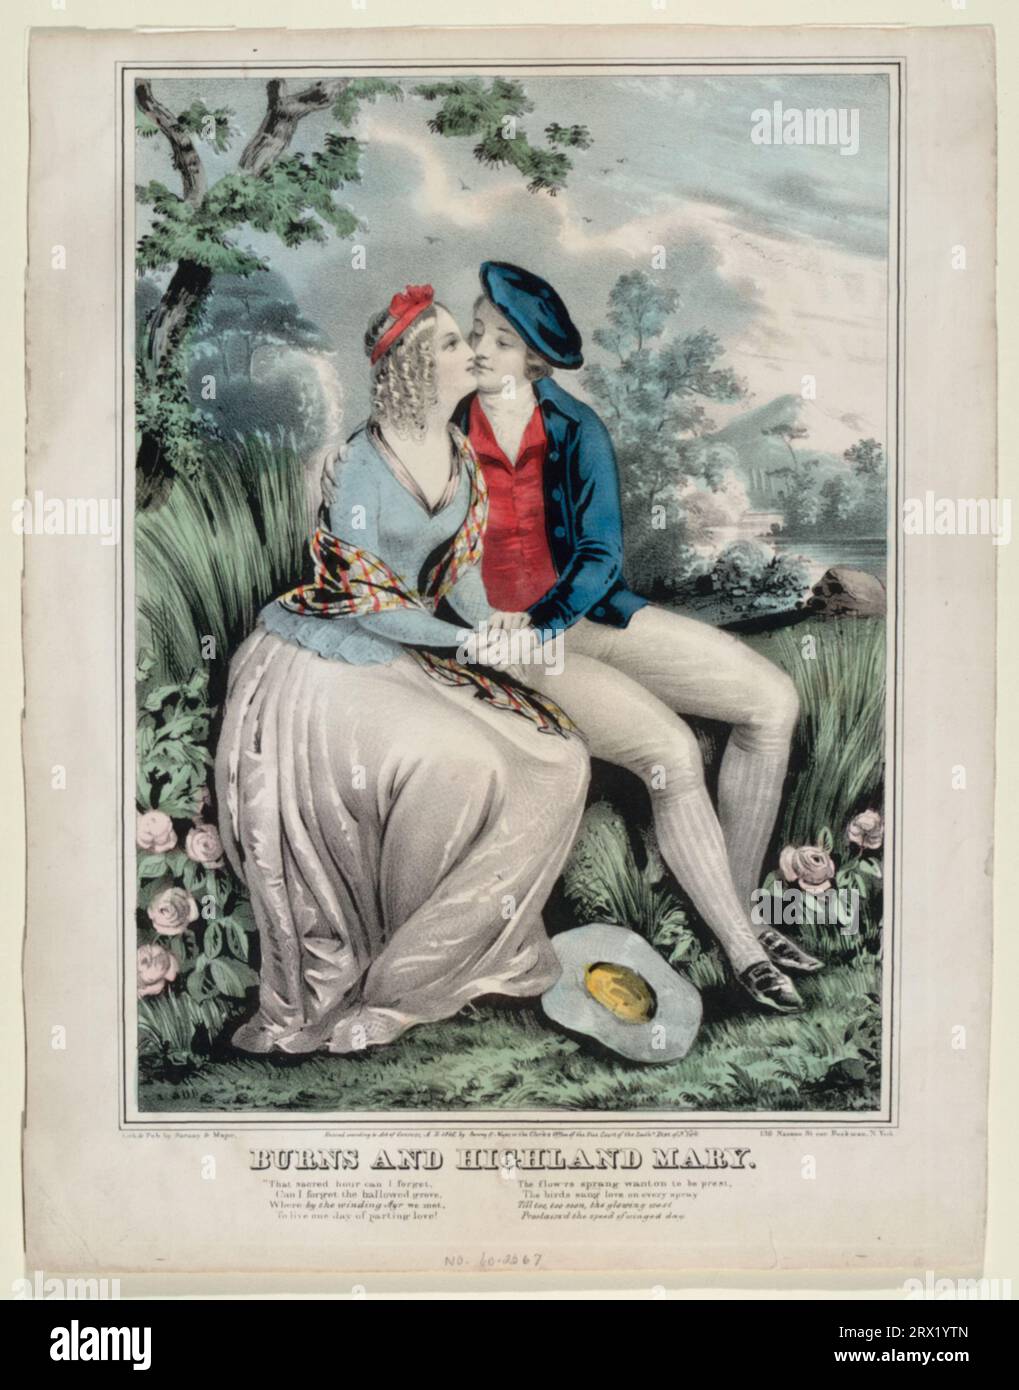 Lithograph, 'Burns and Highland Mary'. DL*60.2267. Peters Prints Collection. Stock Photo